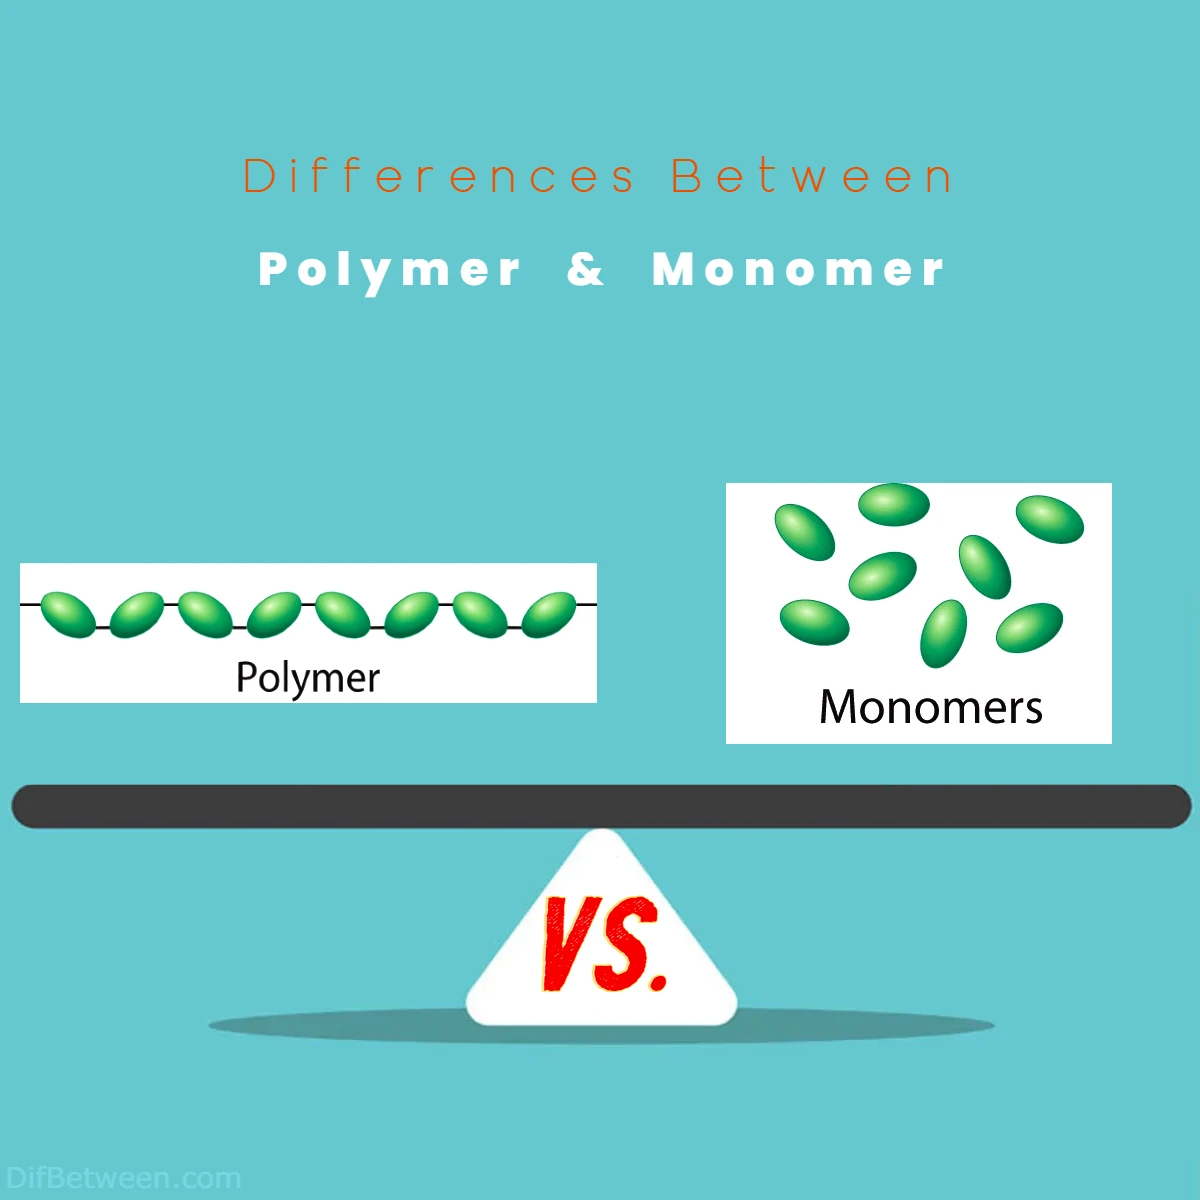 Differences Between Polymer vs Monomer